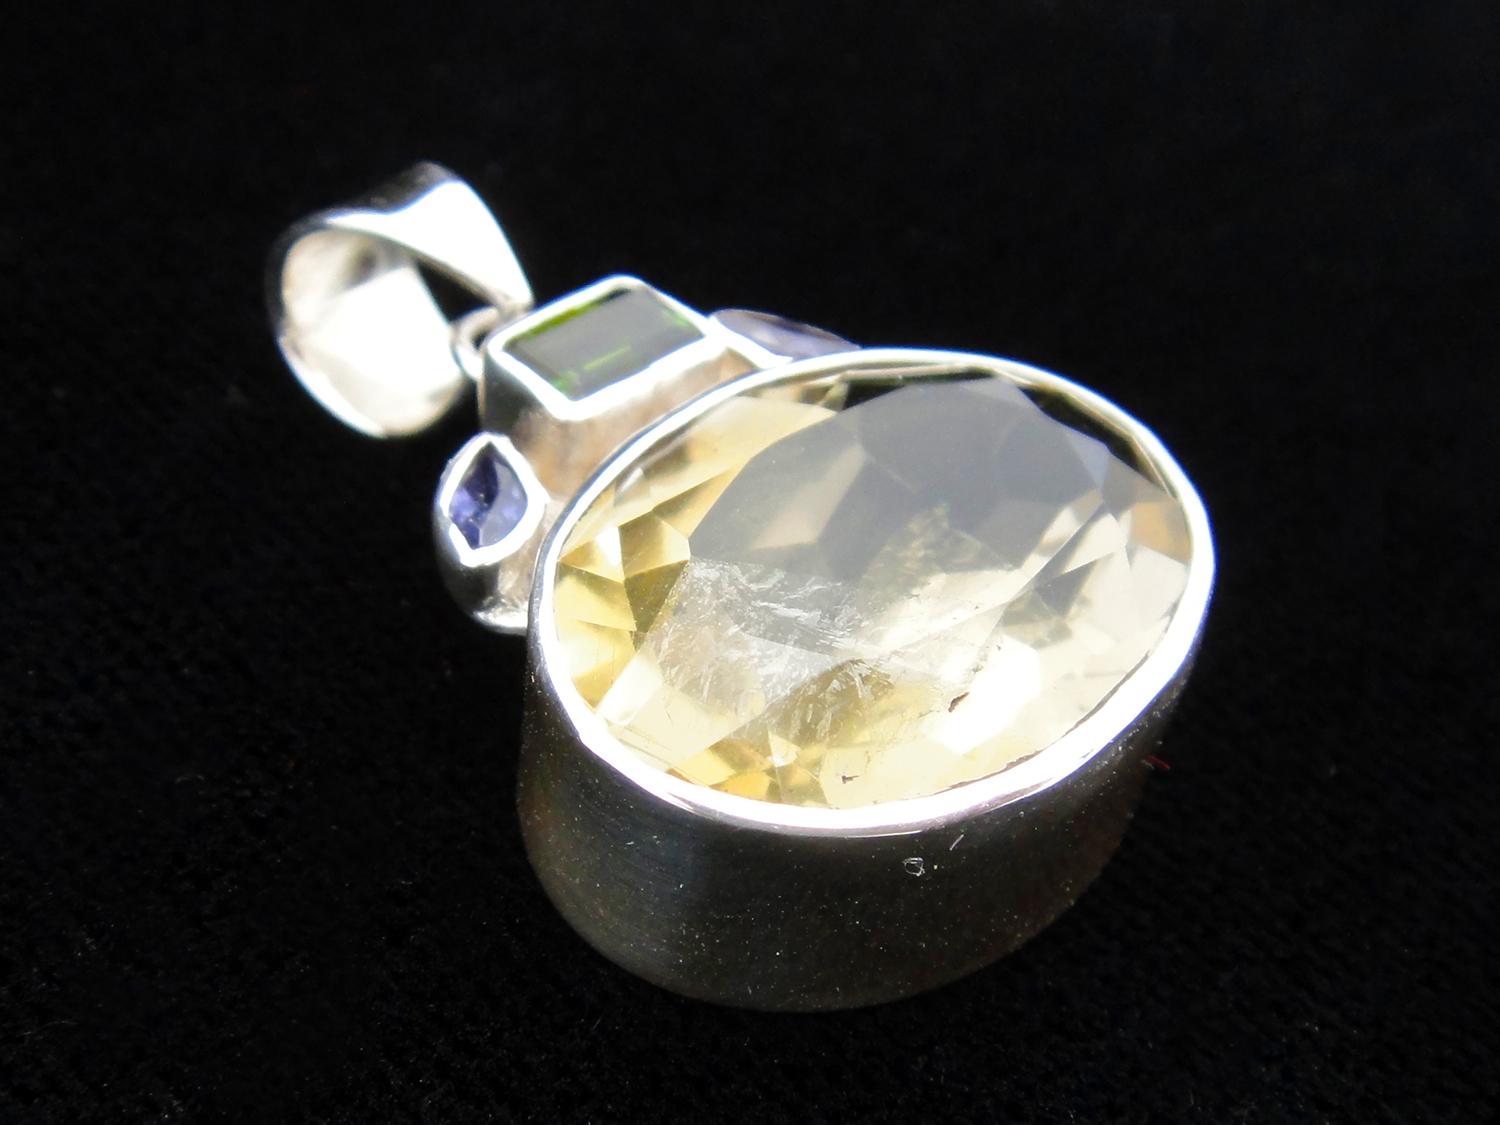 We collaborate with a master silversmith in Kotegeti, Java, the heart of the silver industry in Indonesia to create these one of kind peices. This sterling silver pendant features a faceted lemon quartz cabochon and is highlighted by tourmaline and